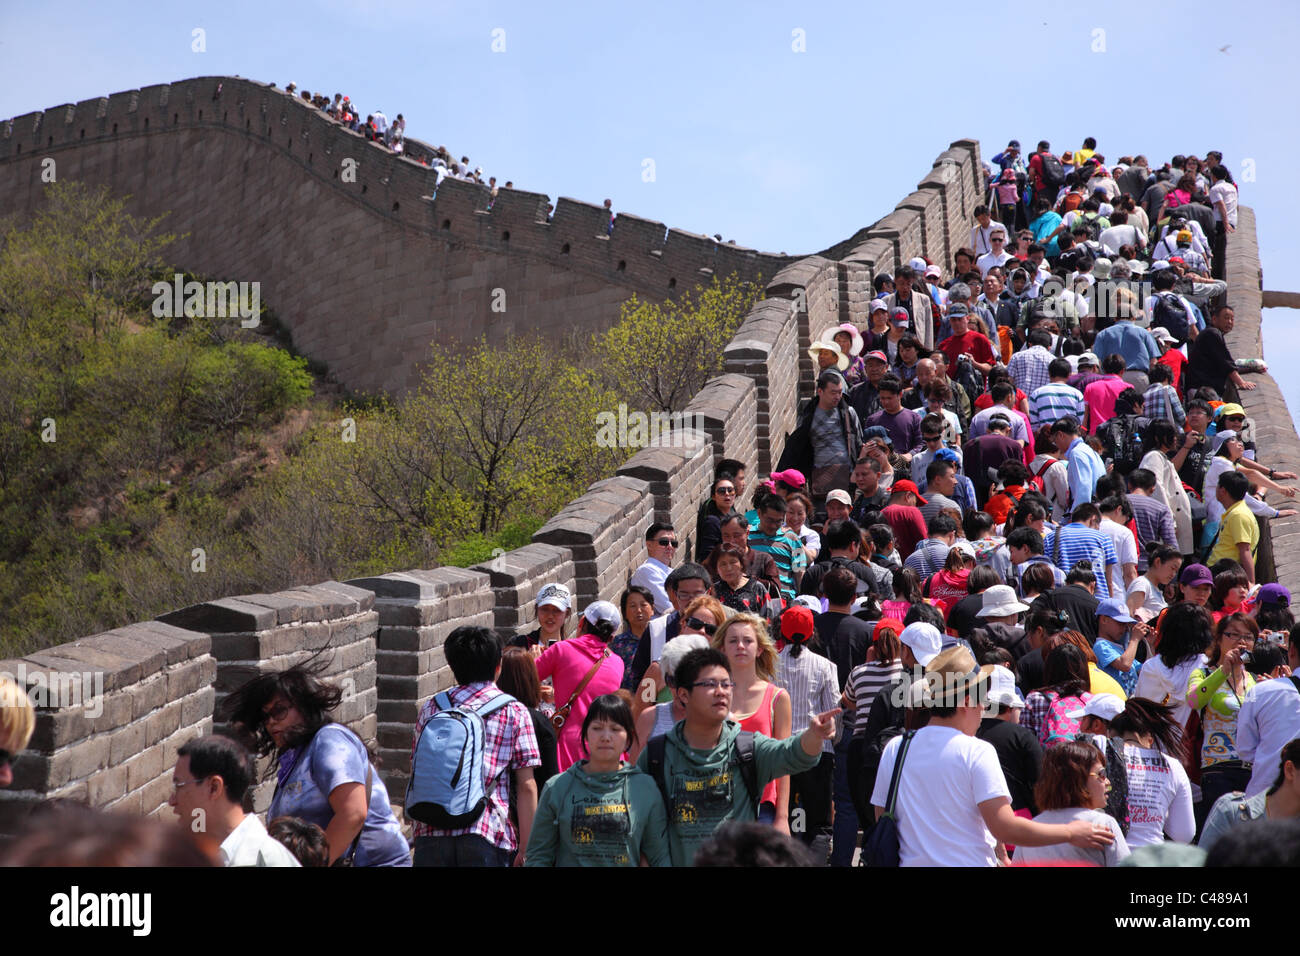 Crowds of poeple at the Great Wall of China, Beijing, China Stock Photo